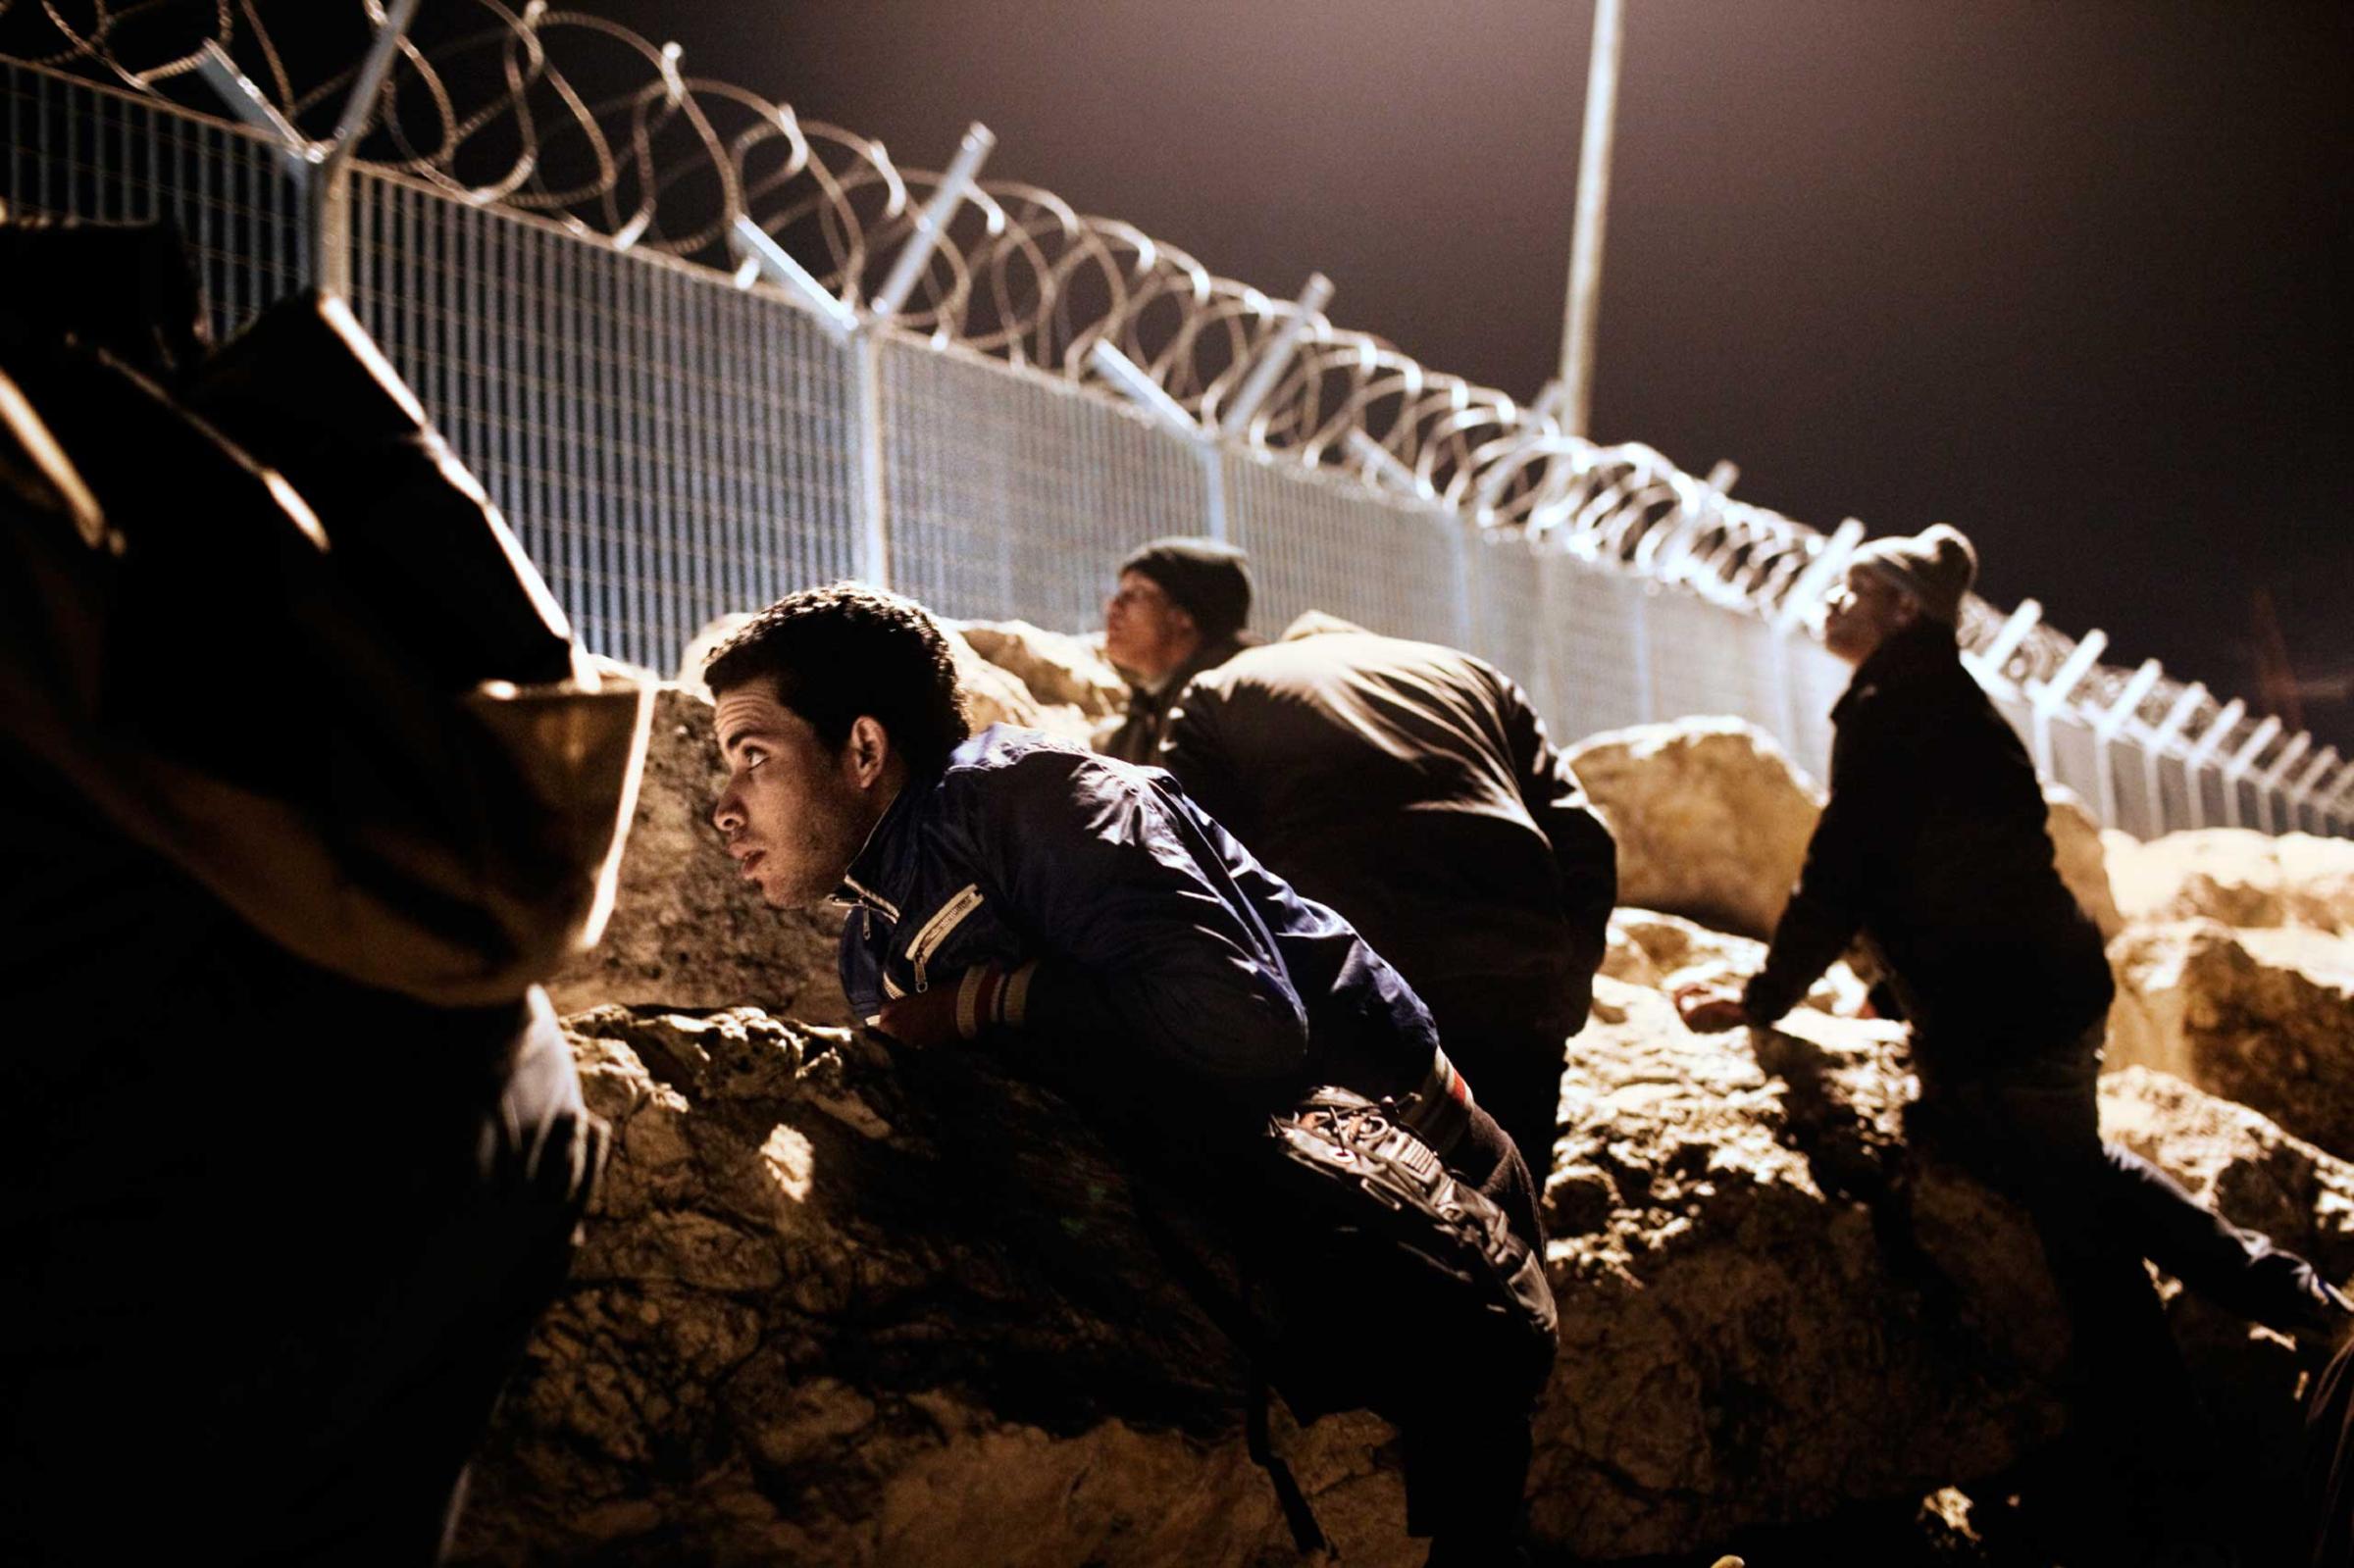 Mohamed from Morocco and his friends hid behind rocks at the port in Corinth, Greece, waiting for the right moment to illegally board a ship to Italy from Greece, 2012. Many young migrants see other European countries as their only hope of a future, and attempt to leave Greece at the first possible moment.